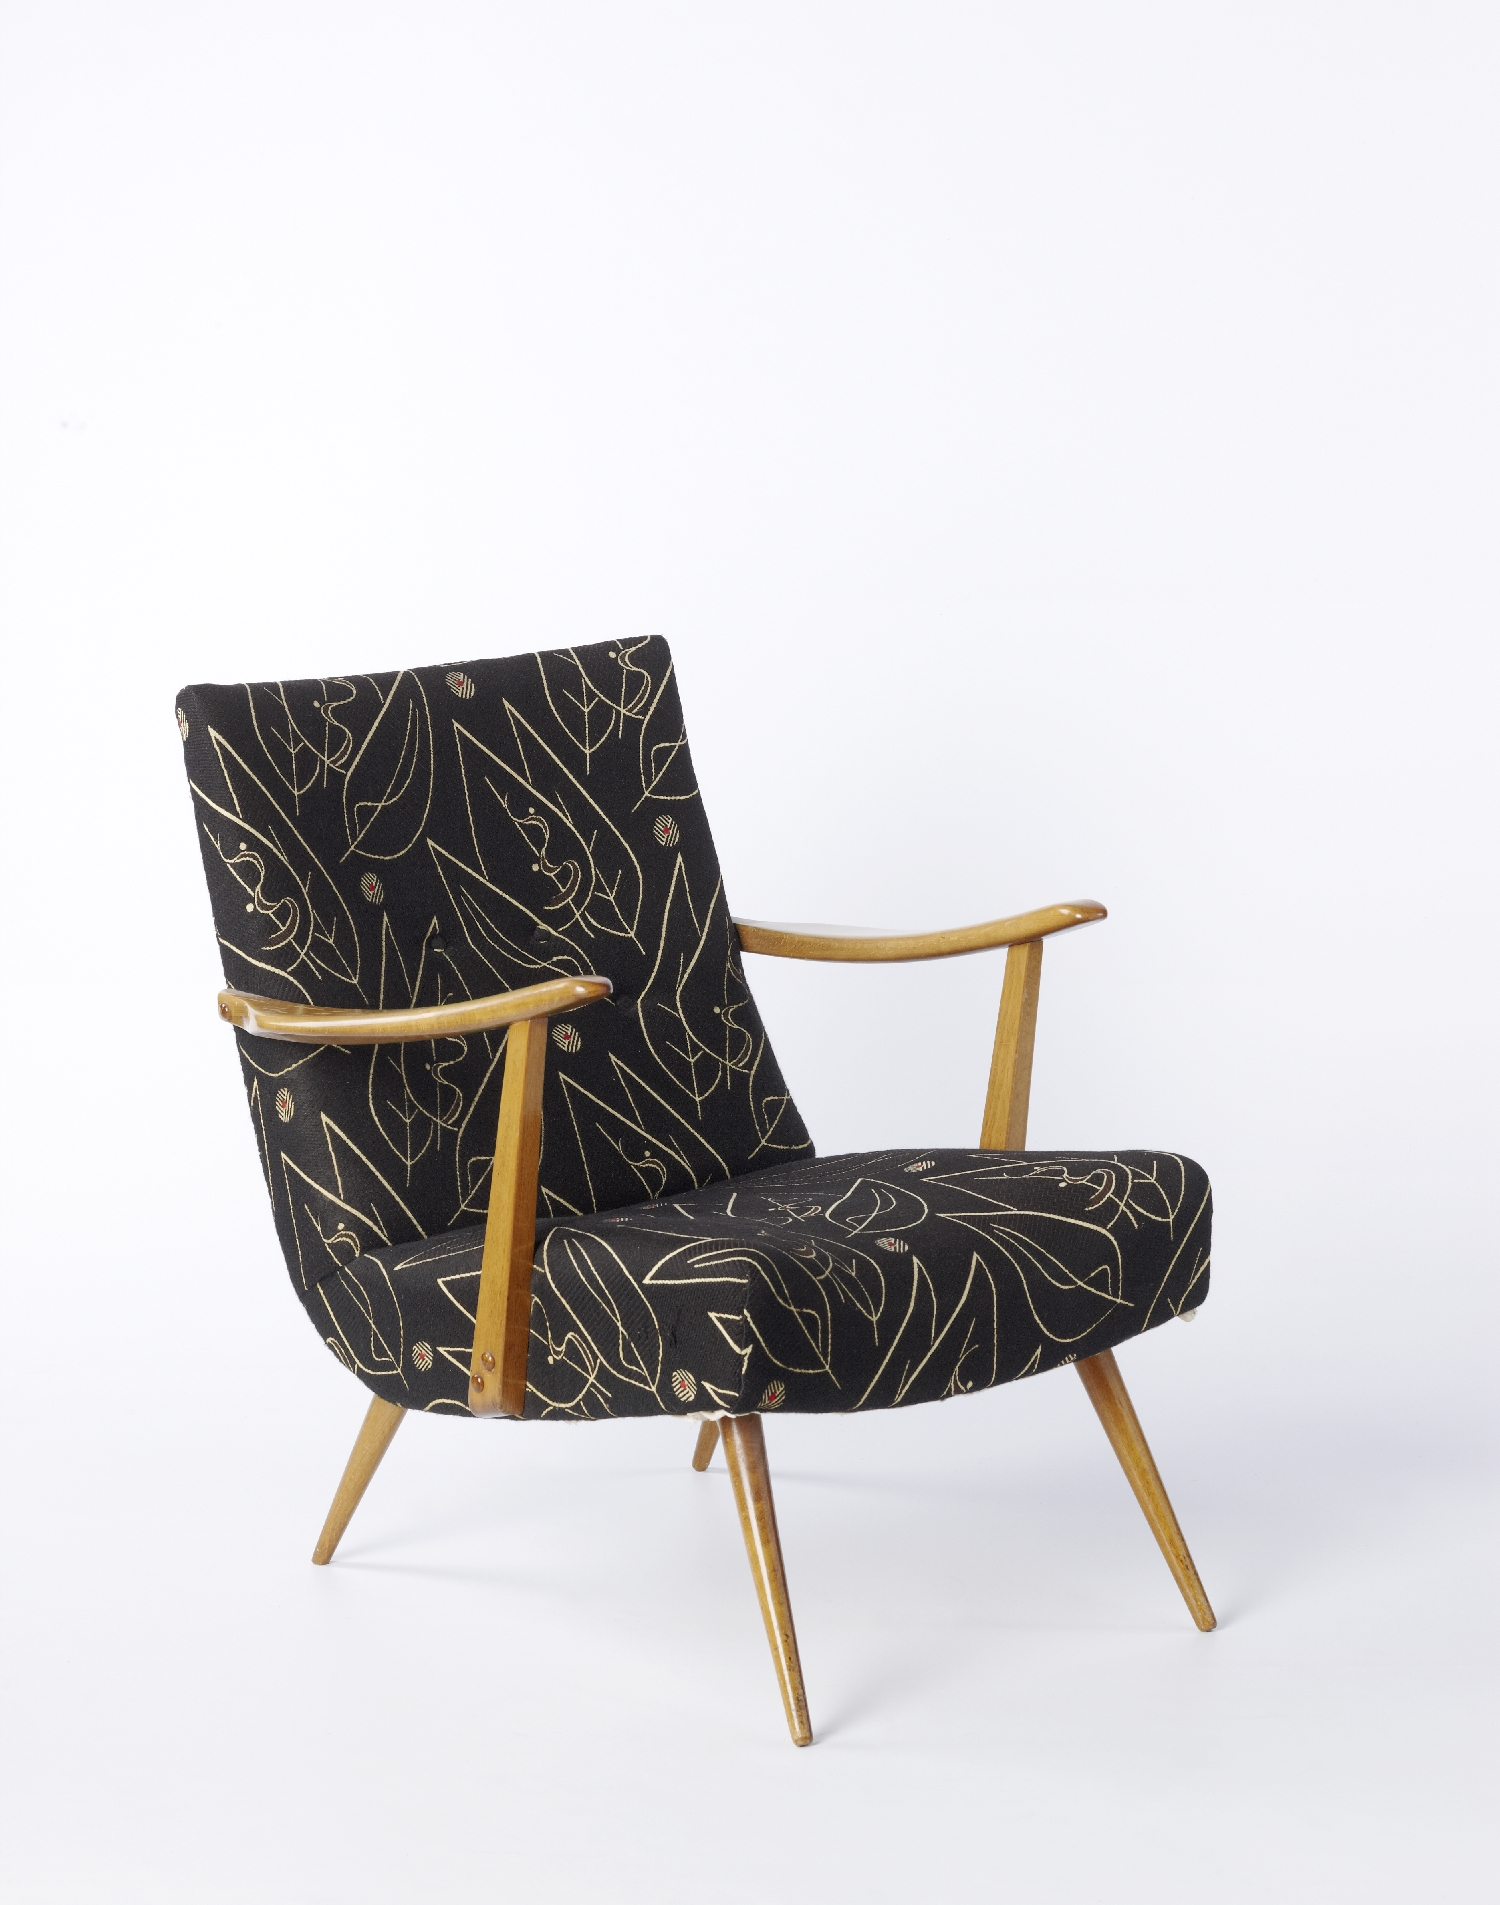 Fauteuil, Österreich, 1950er Jahre, Holz, Stoff, Inv.-Nr. 2117-2011